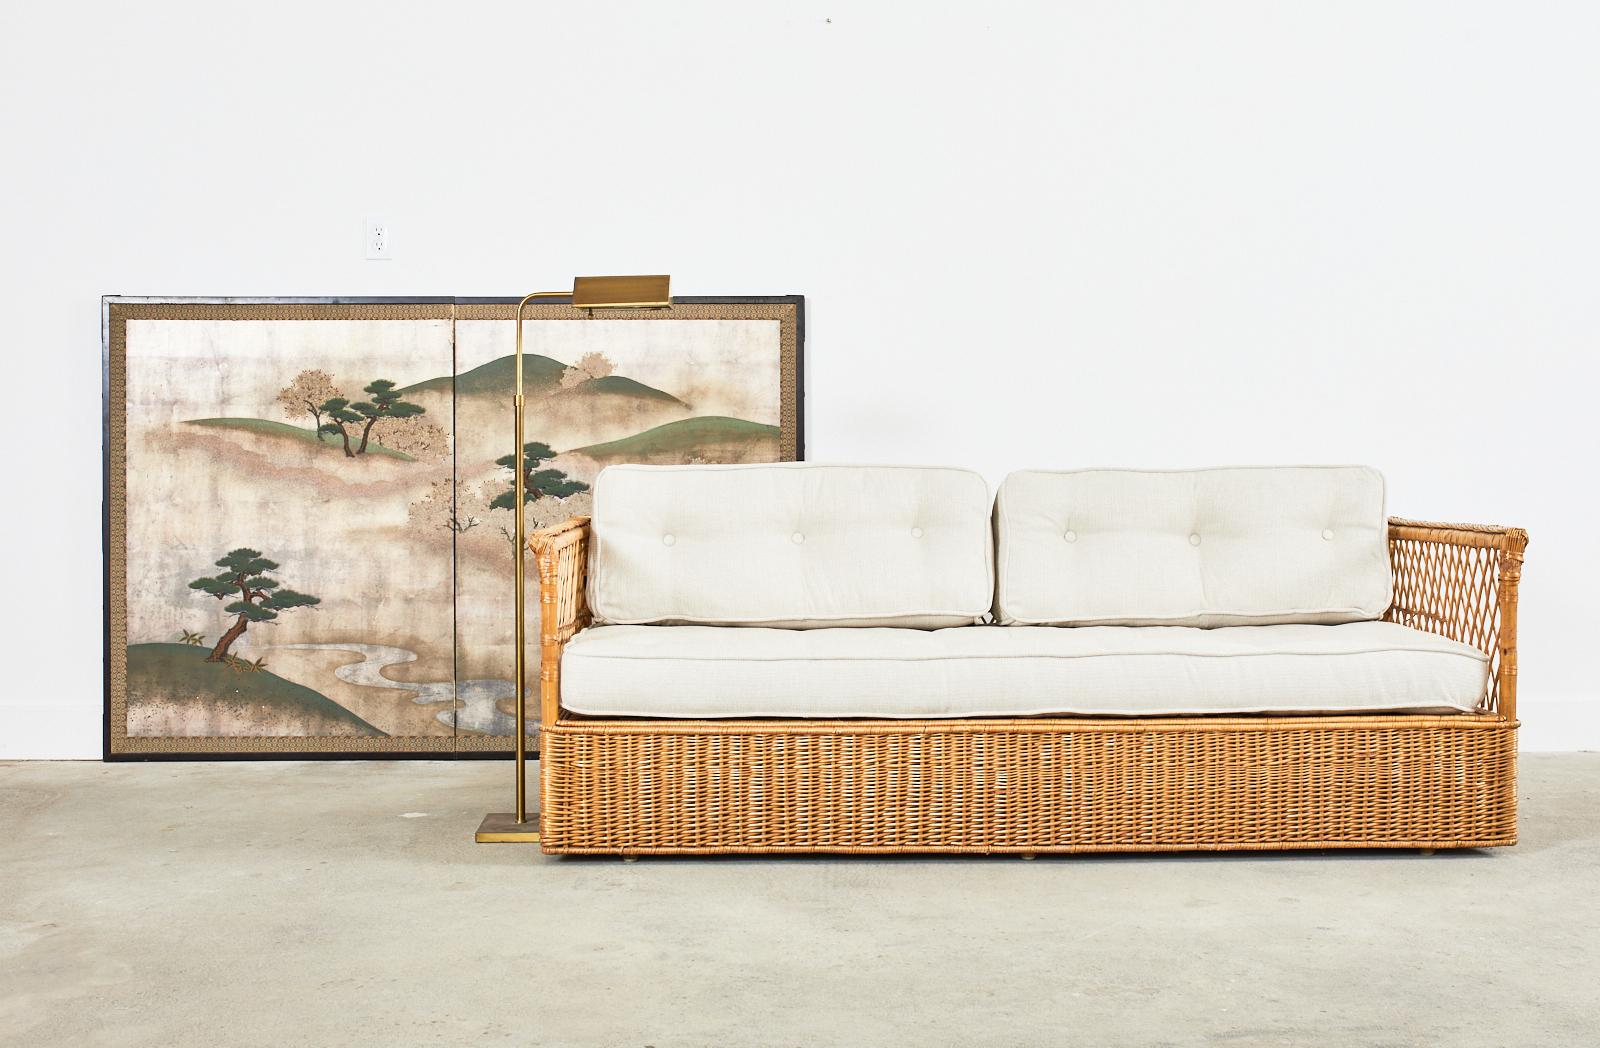 Amazing pair of organic modern coastal style case sofas, settees, or daybeds by McGuire. These rare and labor intensive sofas were only made for a short time by McGuire and feature an oak and rattan frame covered with woven wicker. Above the wicker